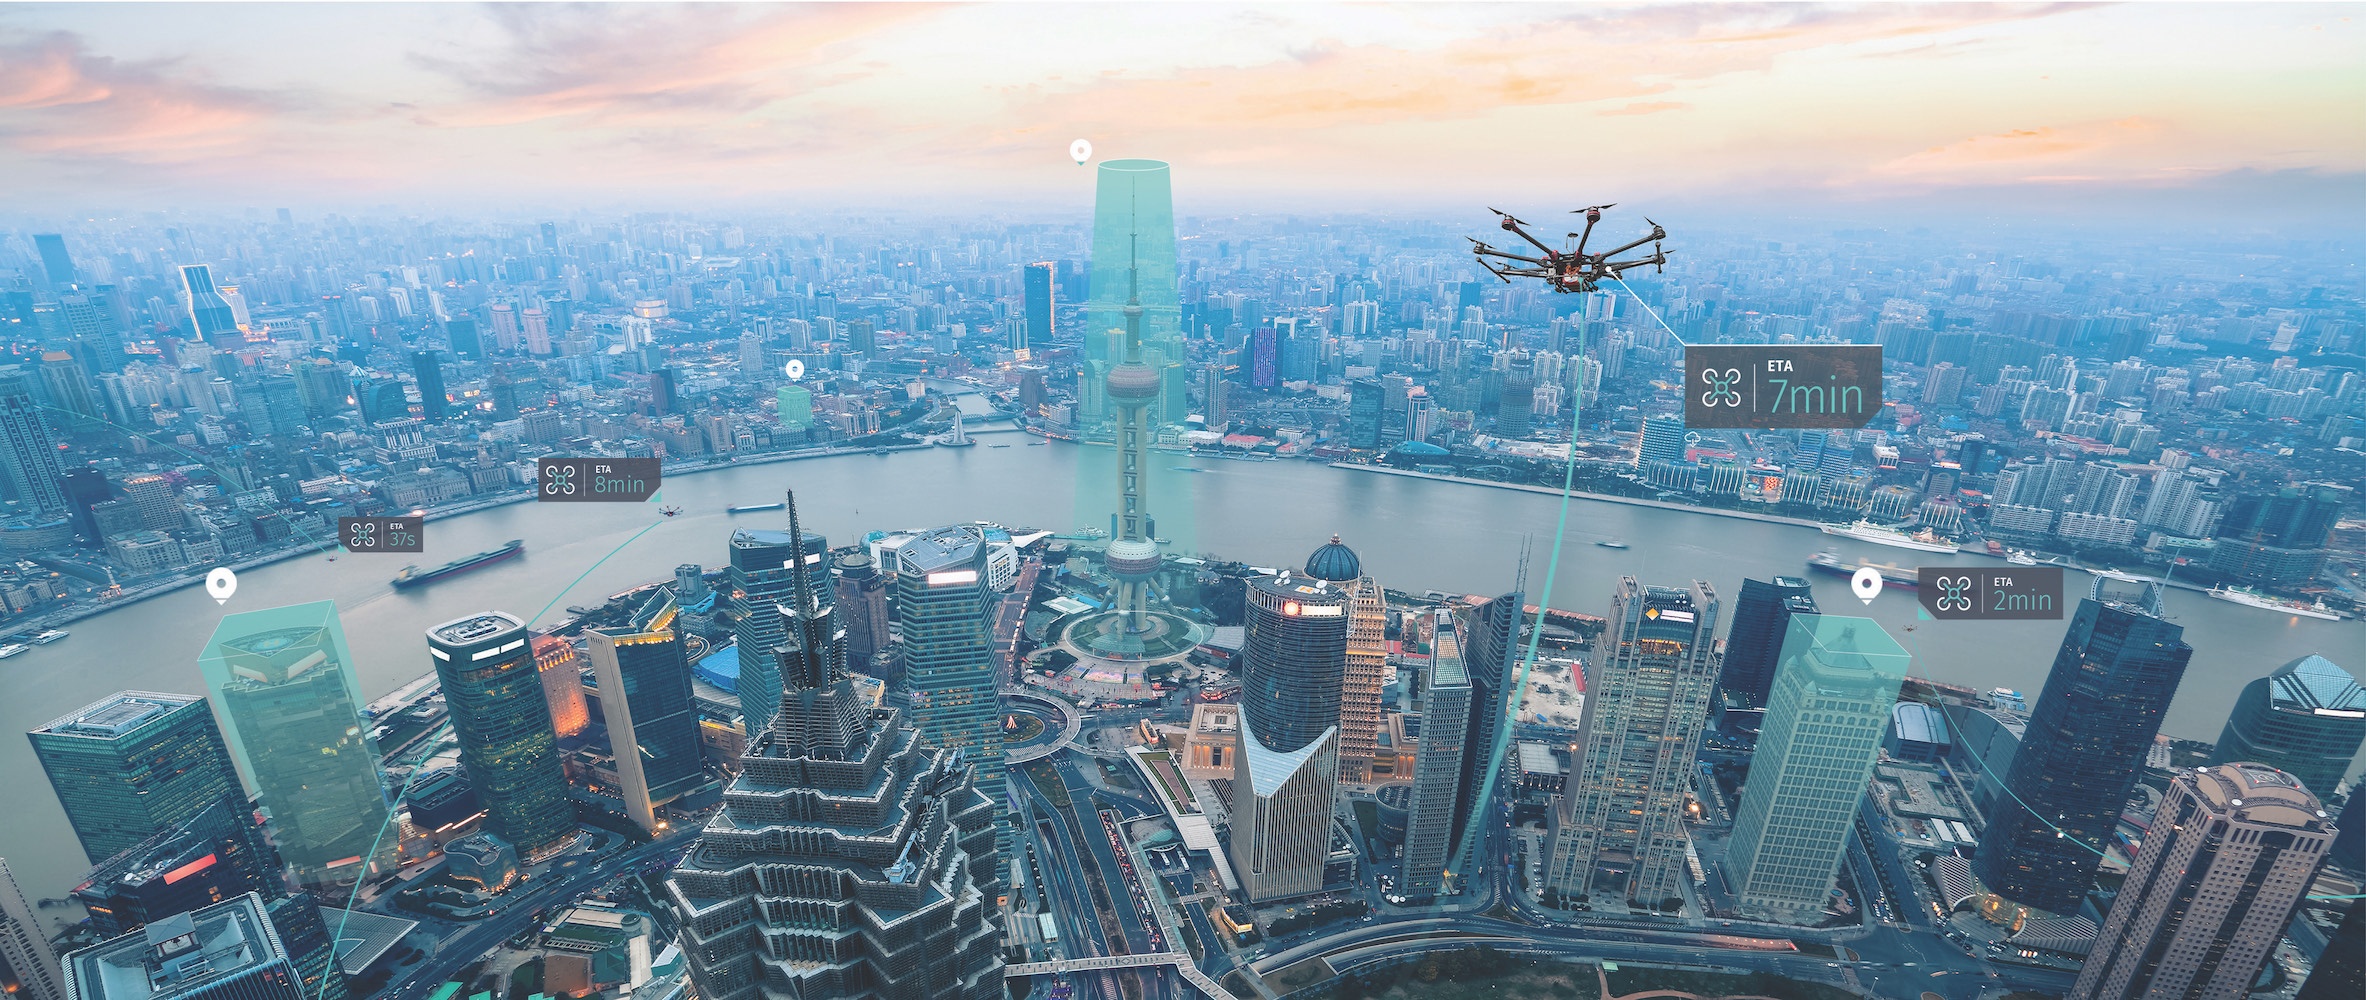 Drones and Location Technology